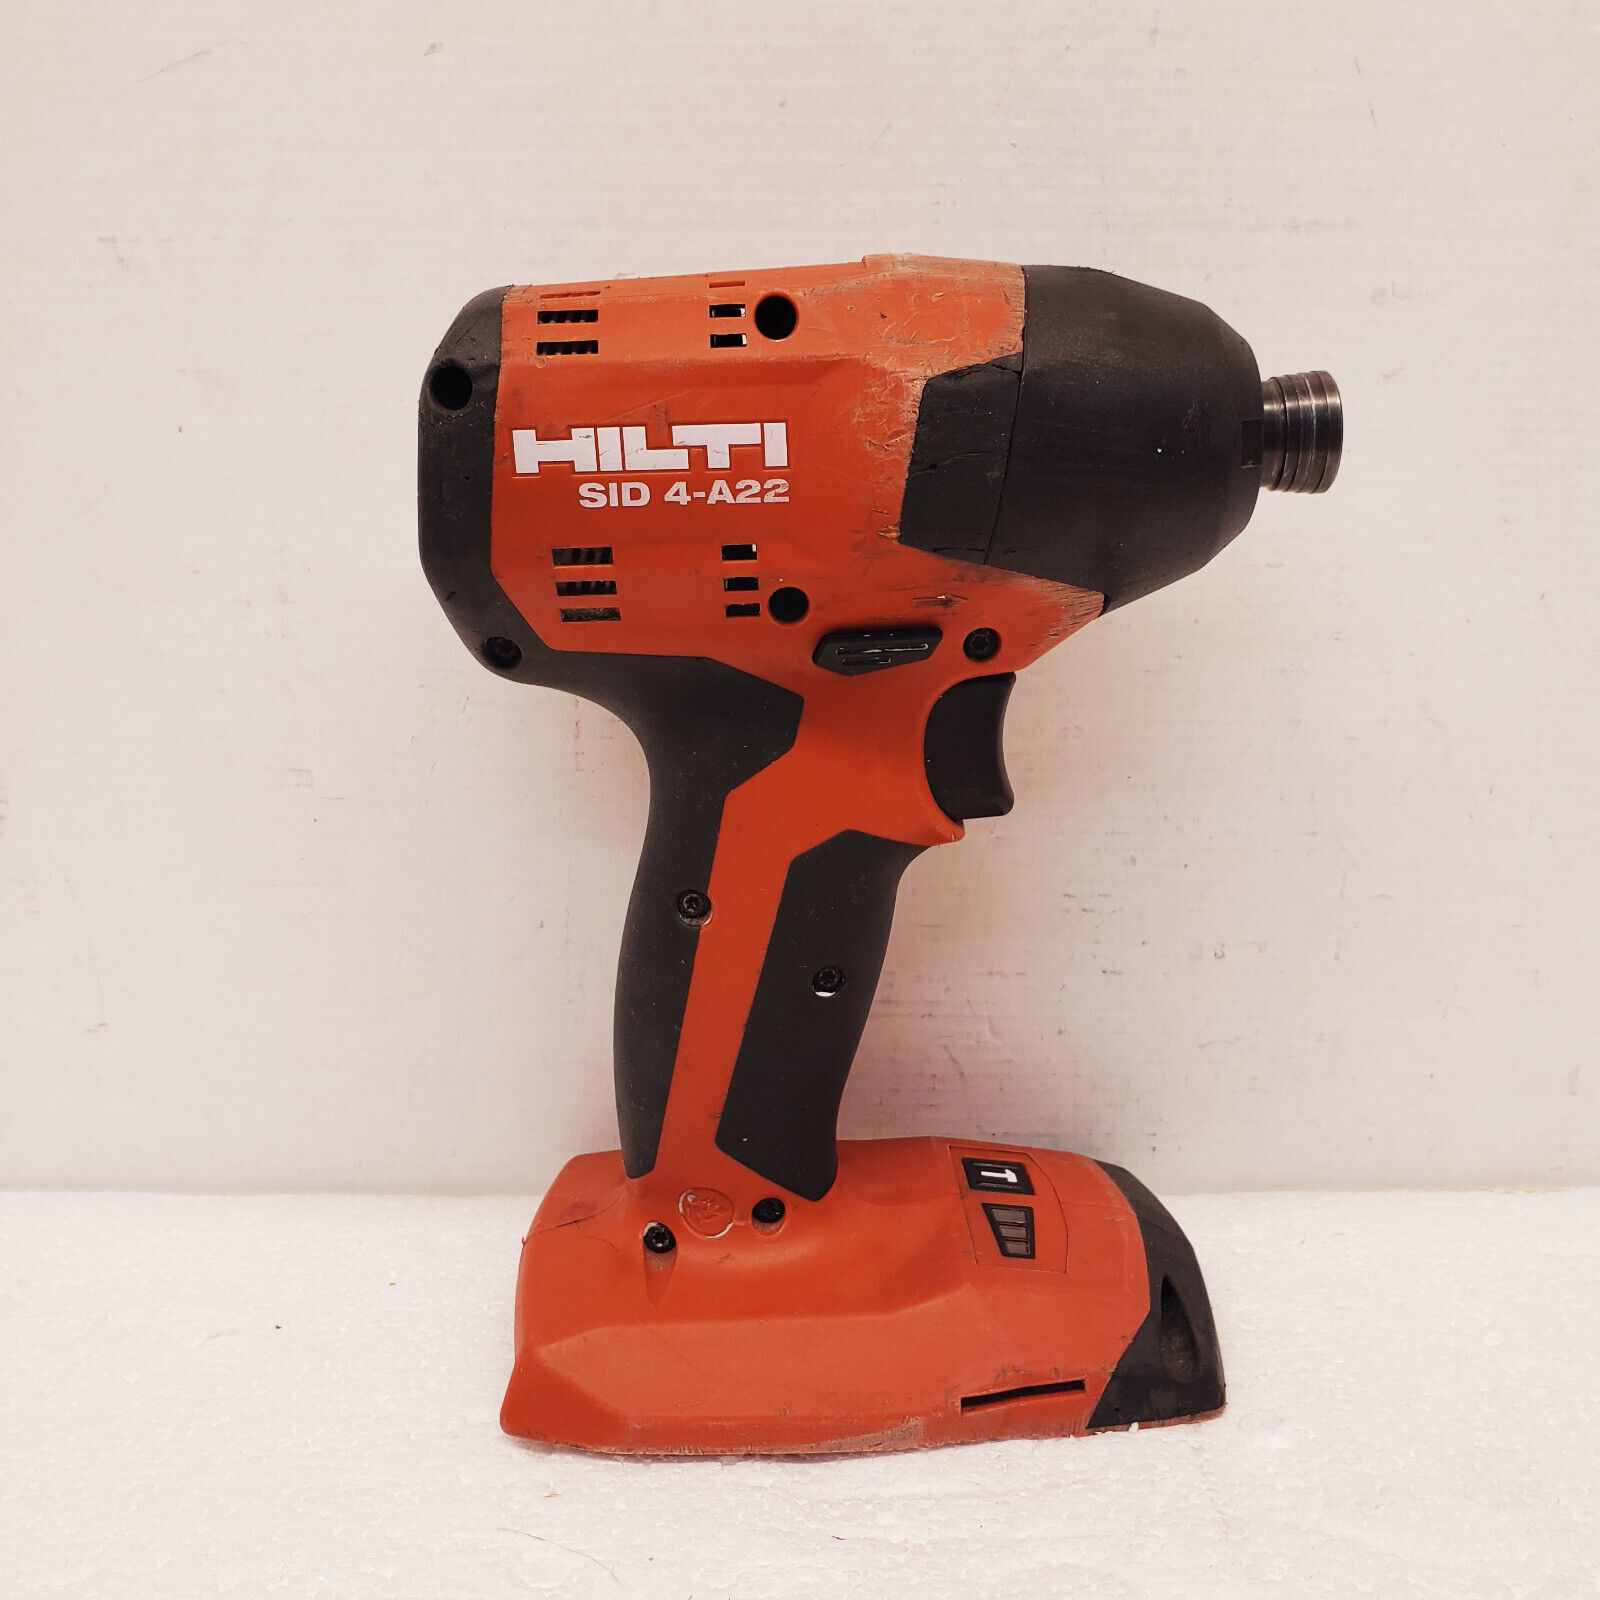 Hilti Sid 4-a22 L-ion 22-volt 1/4 In. Hex Brushless Sid 4 Impact Driver, 3-speed